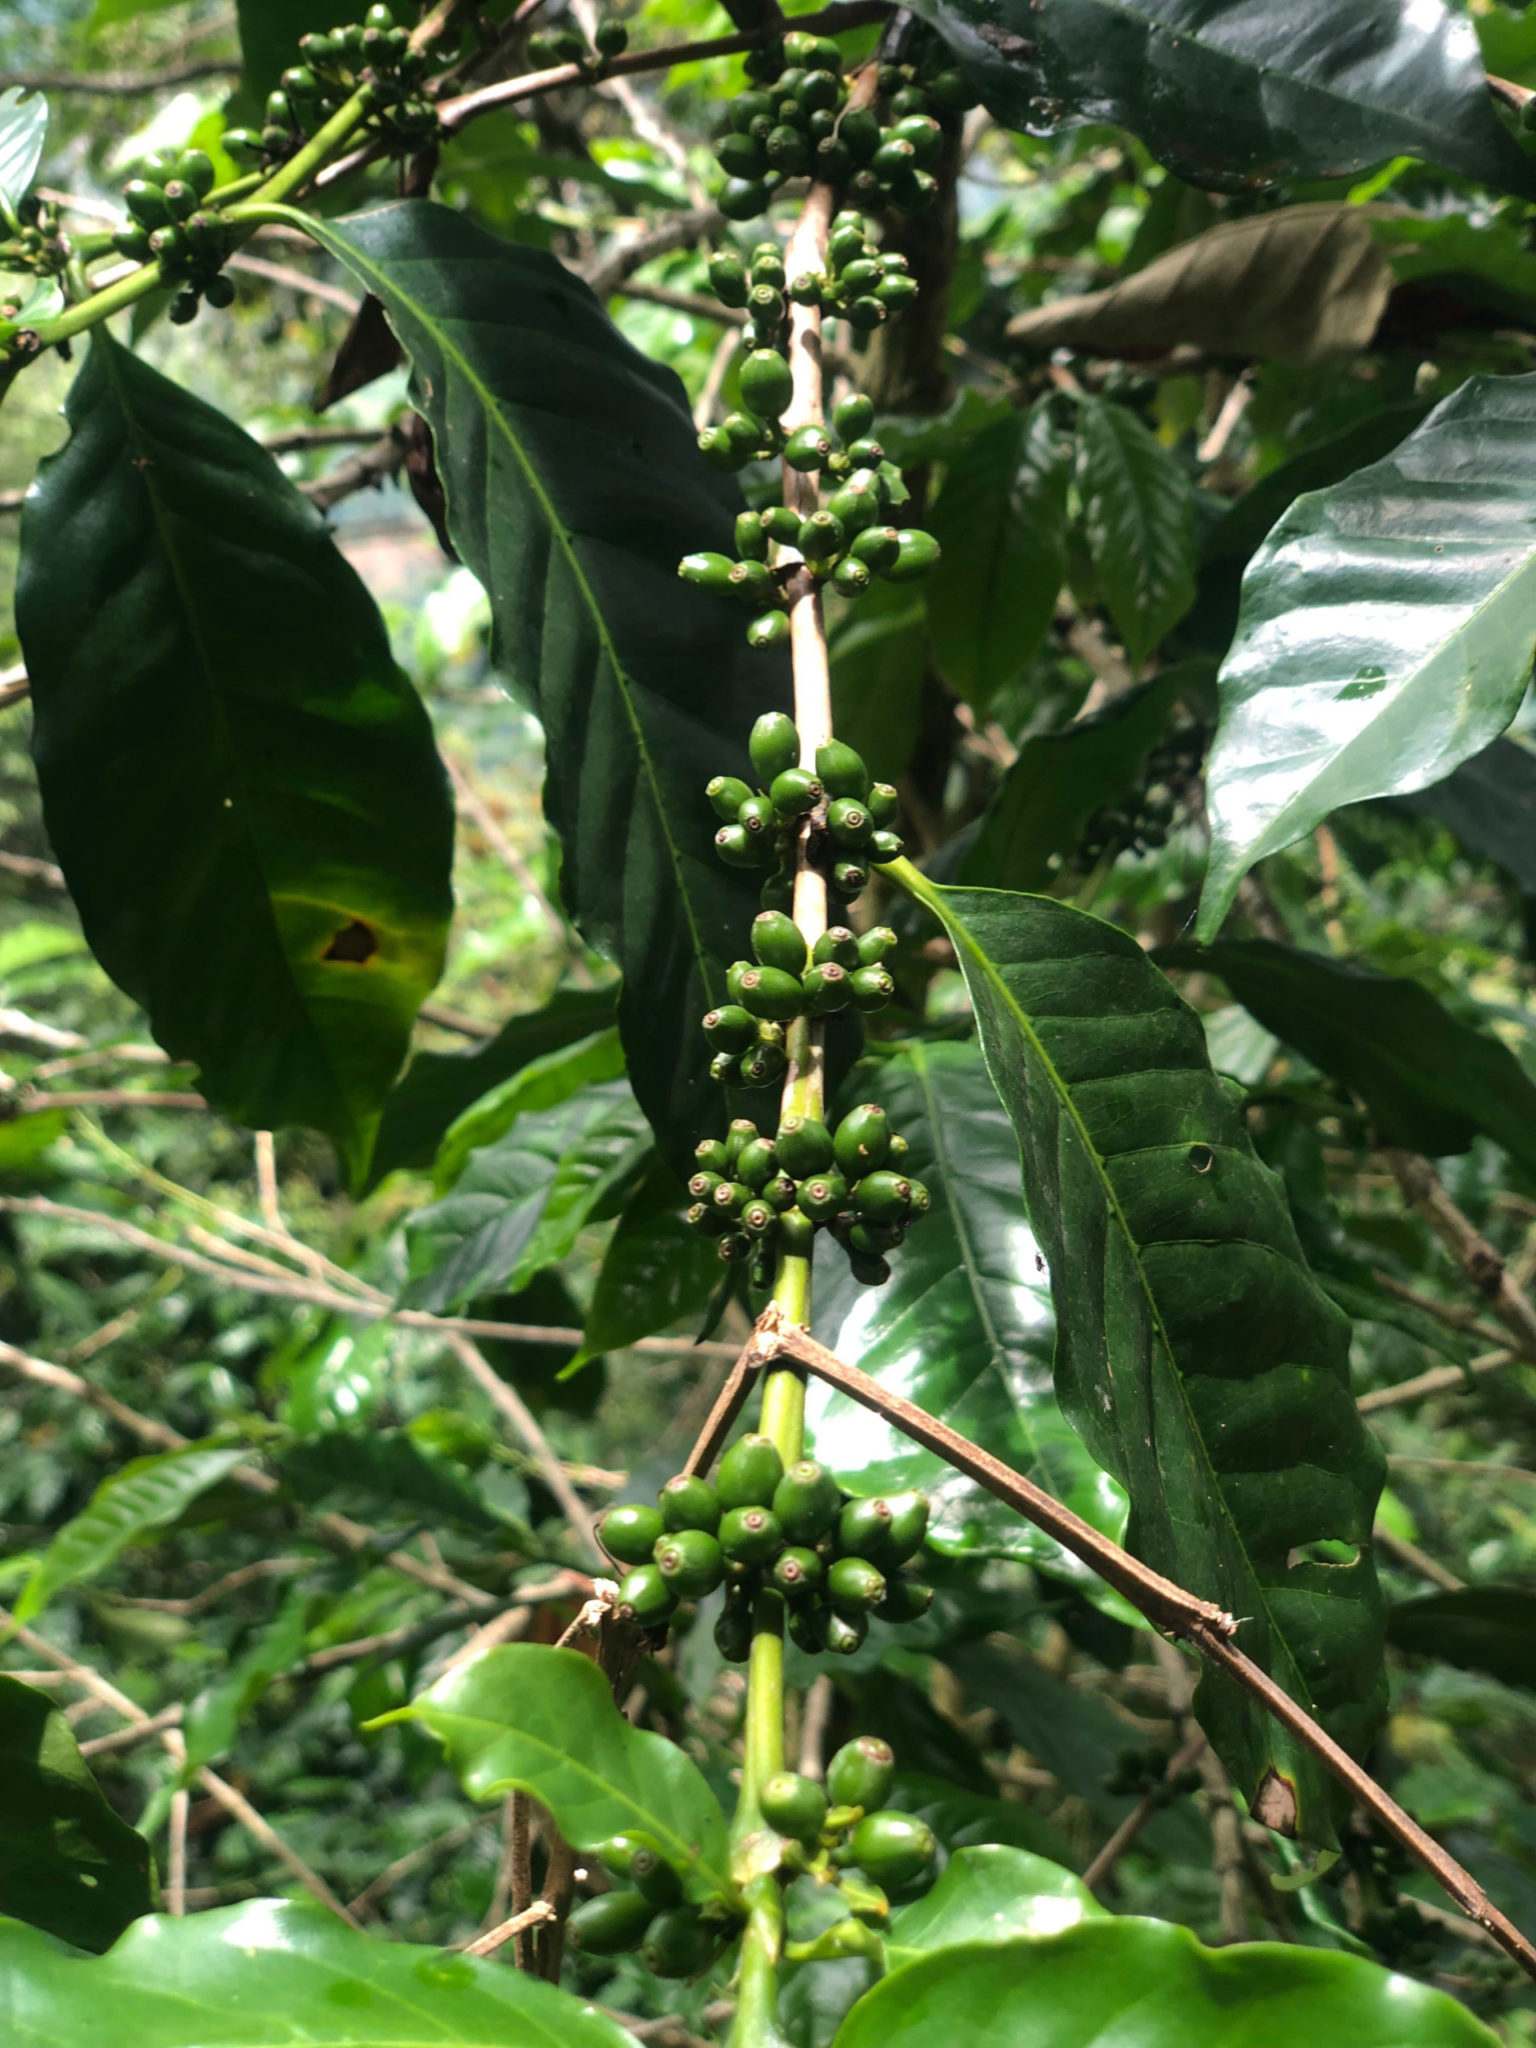 Green coffee cherries at the coffee plant